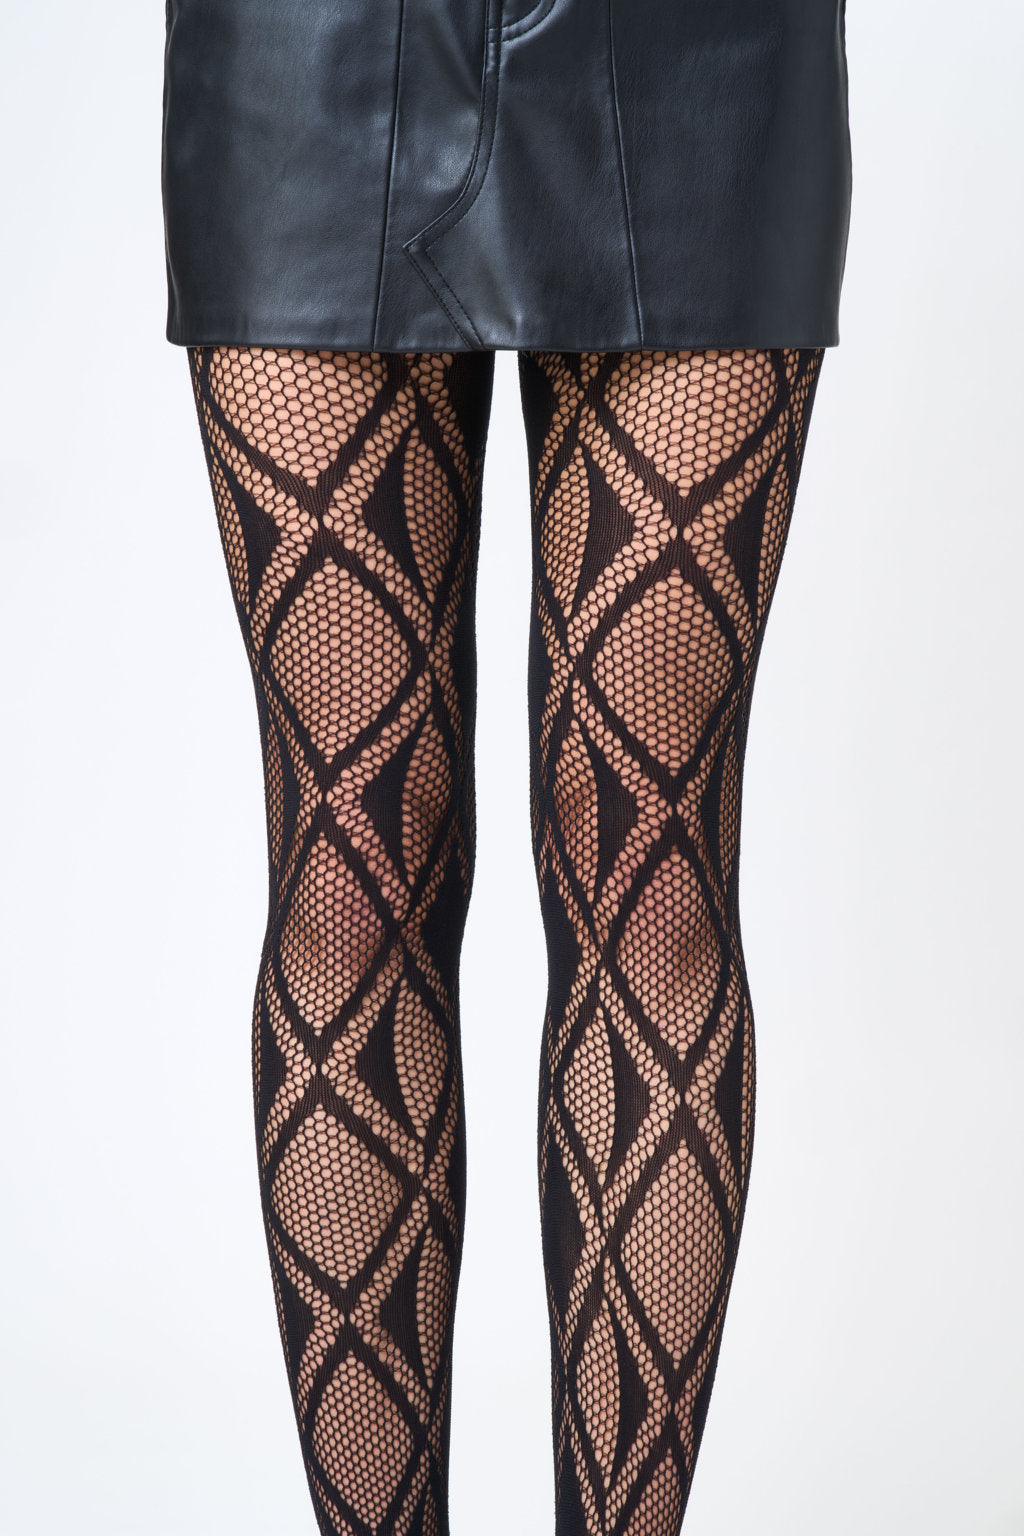 SiSi Astratto Rete Collant - Black openwork fishnet fashion tights with a diamond style pattern and seamless body.